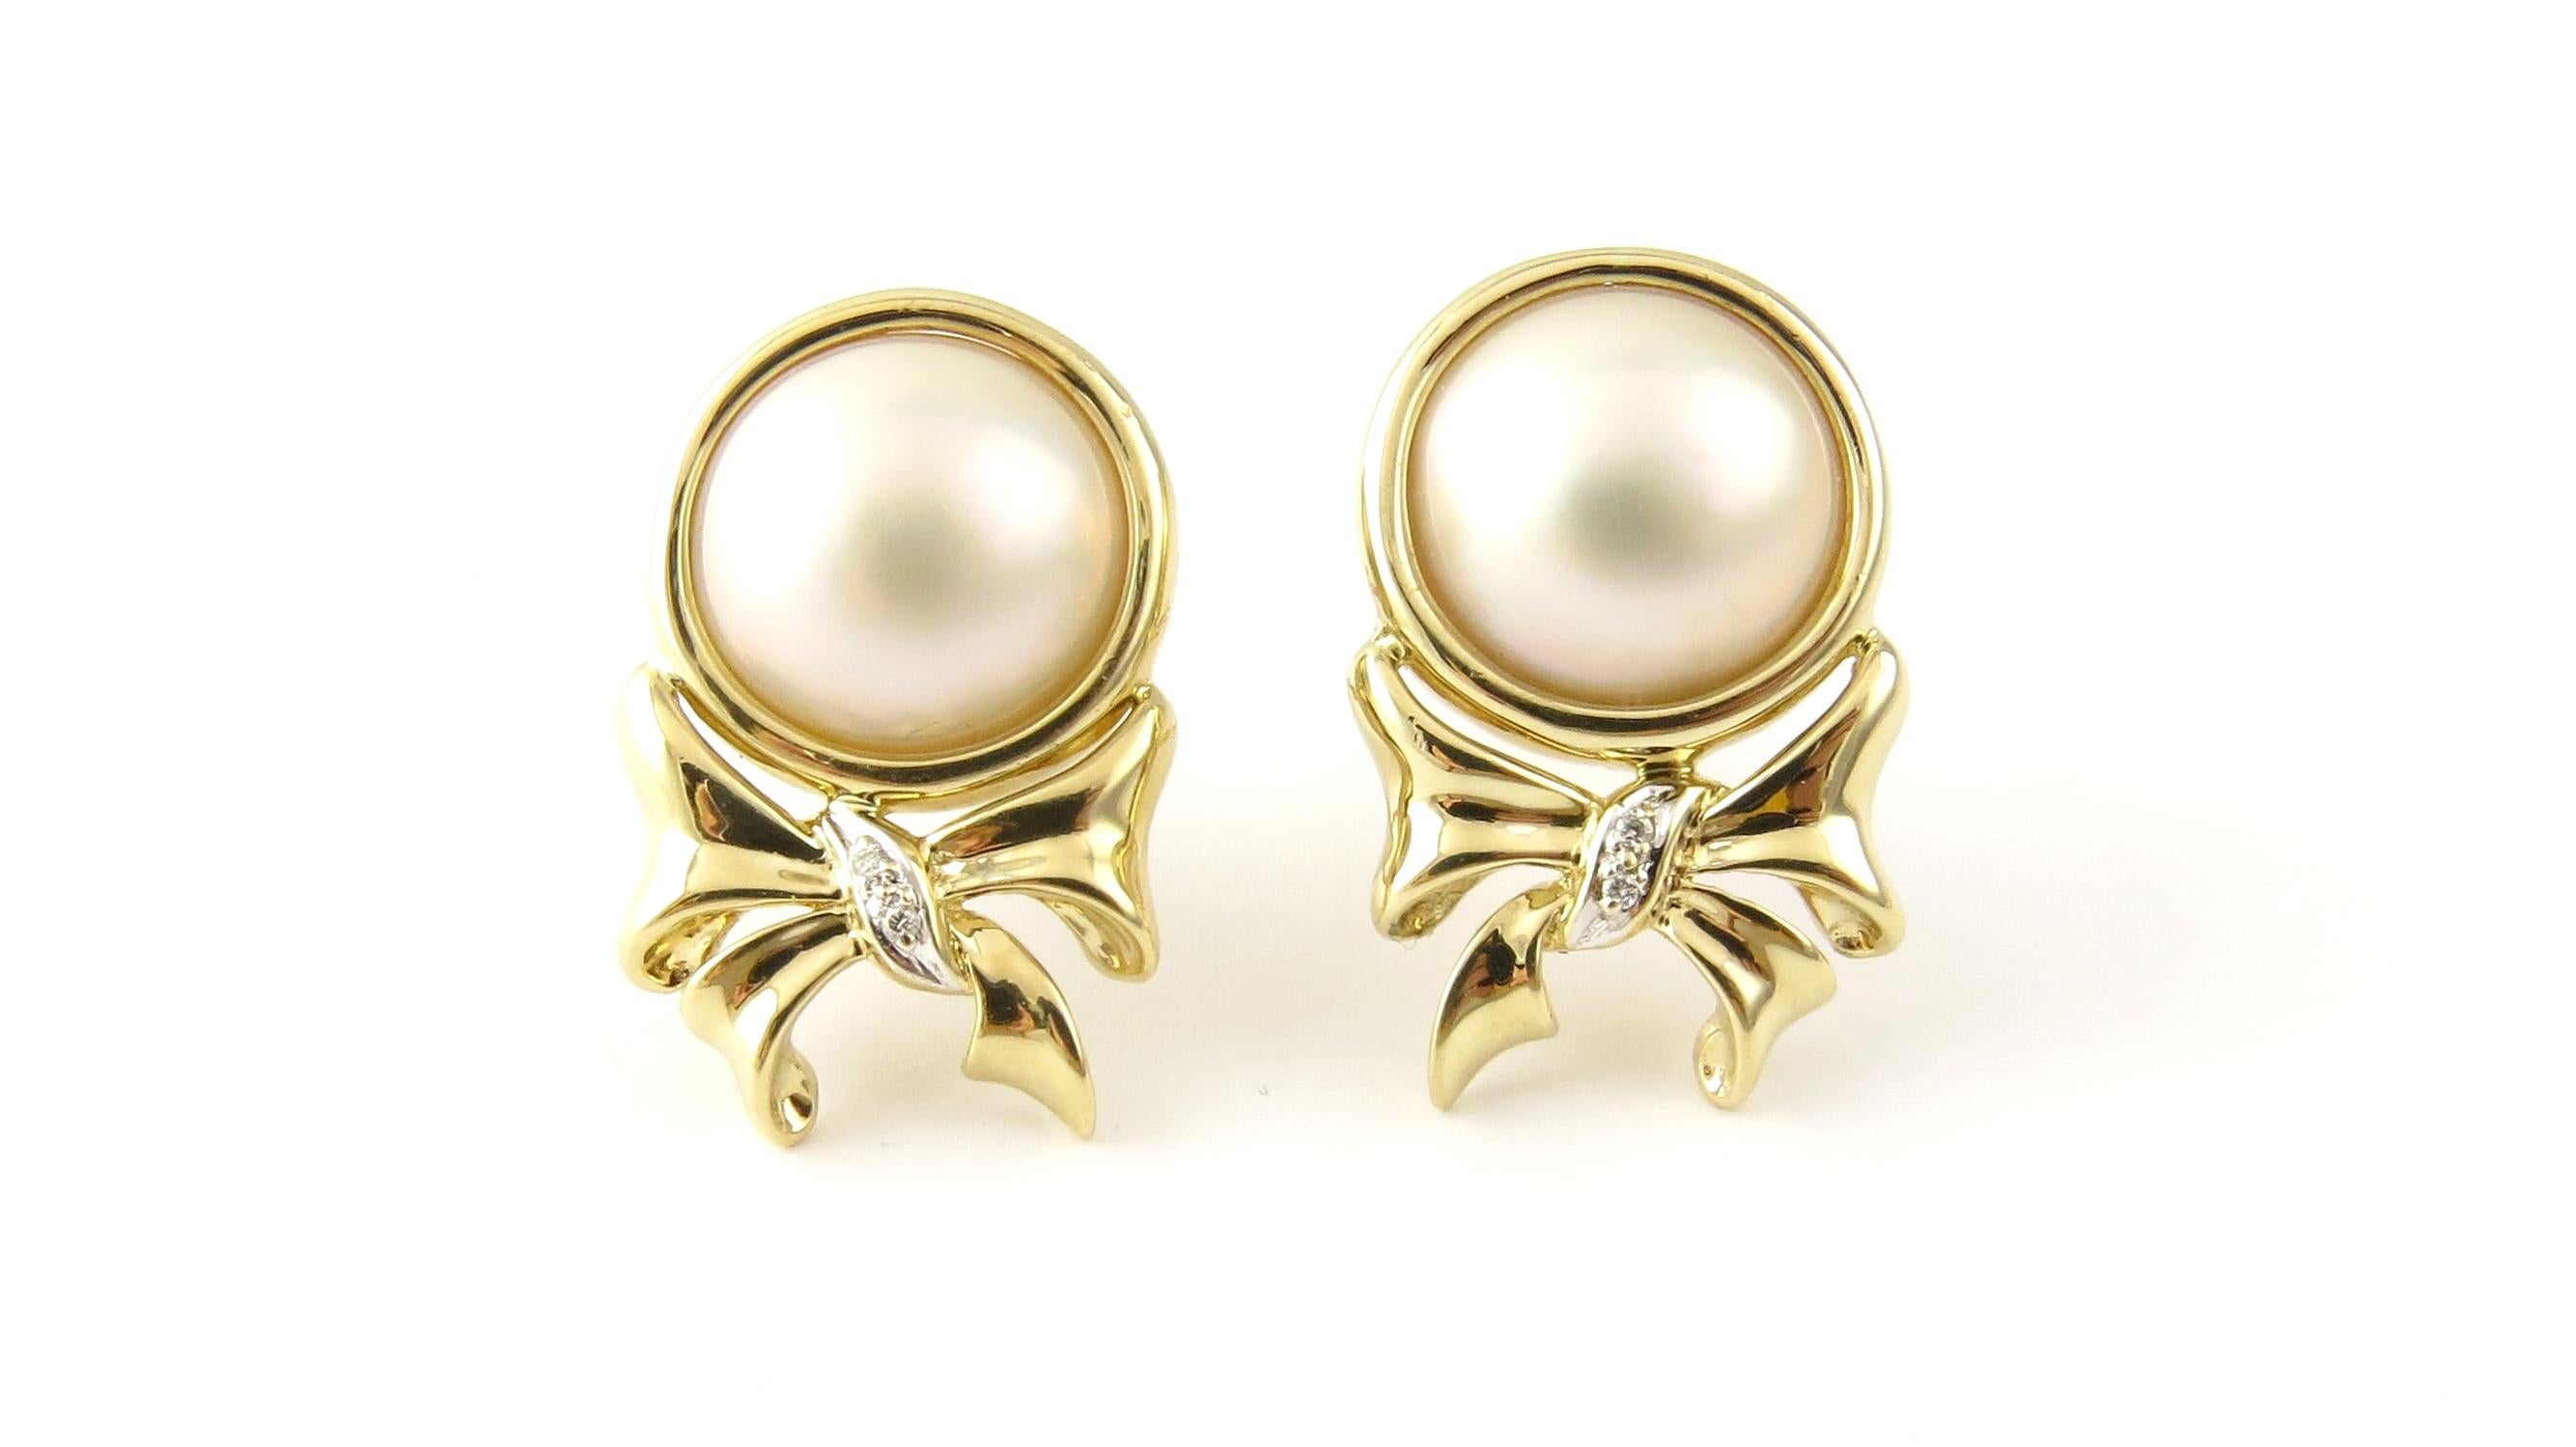 Vintage 14 Karat Yellow Gold Pearl and Diamond Earrings

These stunning clip-on earrings each feature one round pearl (12 mm) framed in beautifully detailed 14K yellow gold and accented with two round brilliant cut diamonds.

Approximate total